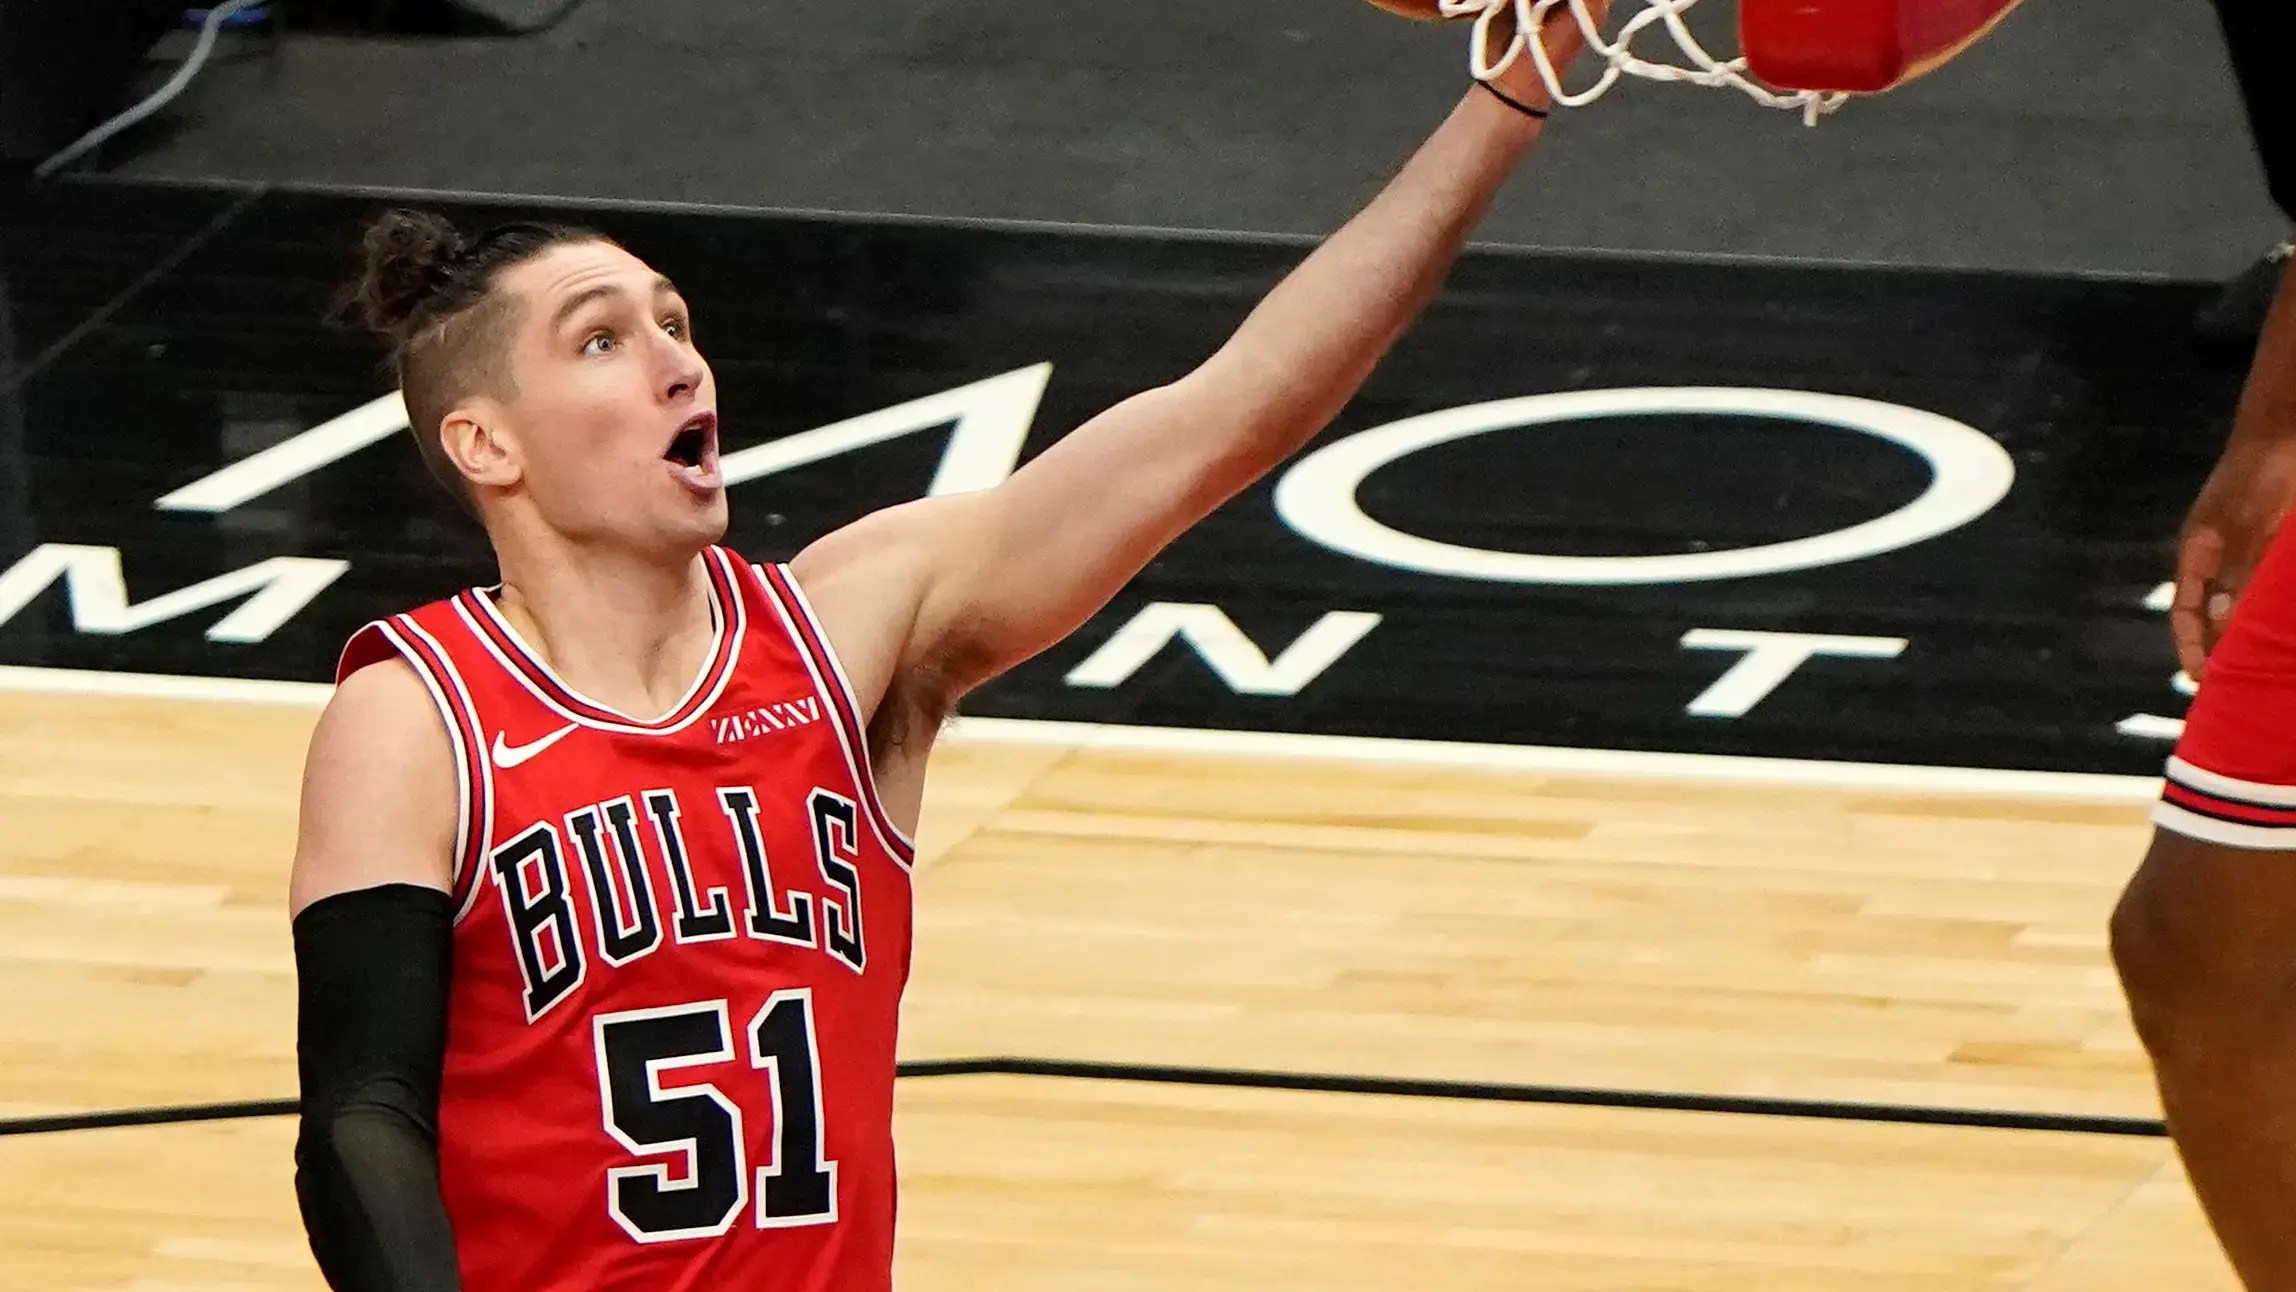 Feb 20, 2021; Chicago, Illinois, USA; Chicago Bulls guard Ryan Arcidiacono (51) shoots the ball against Sacramento Kings guard Justin James (10) during the first quarter at the United Center. Mandatory Credit: Mike Dinovo-USA TODAY Sports / Mike Dinovo-USA TODAY Sports